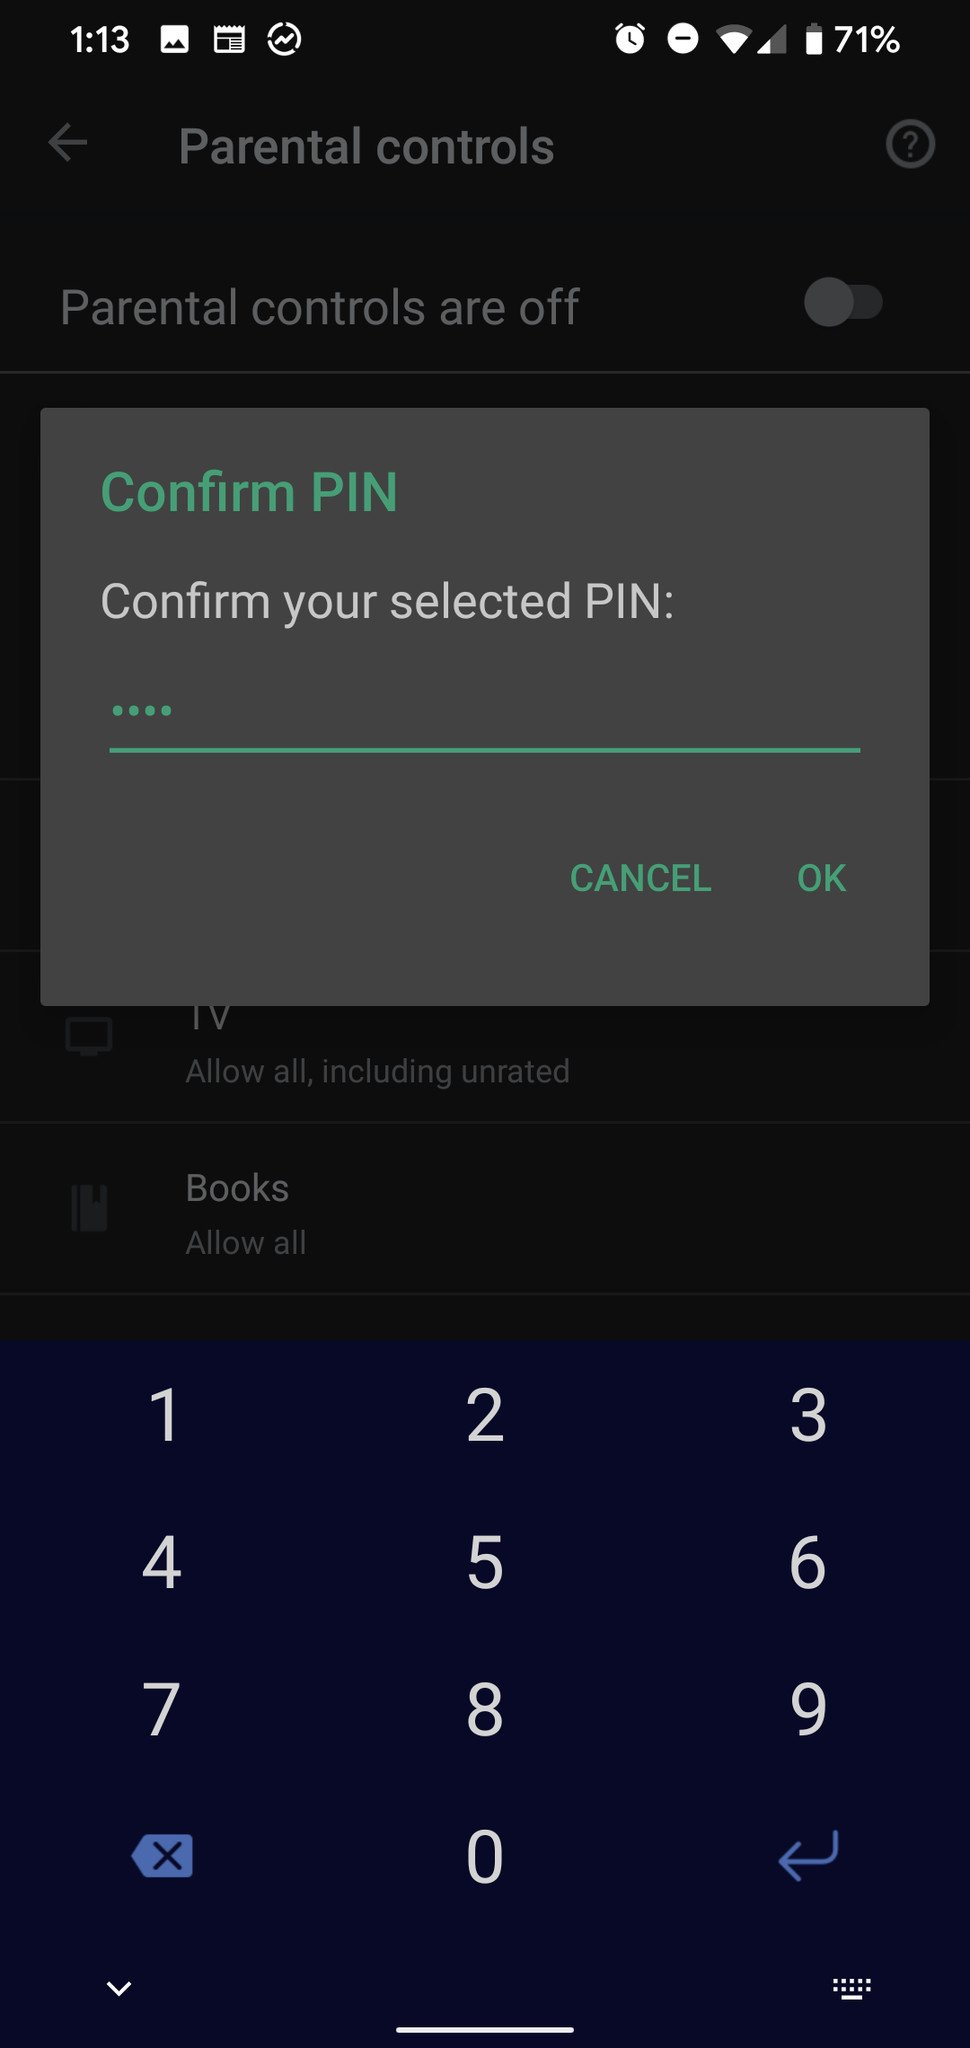 Confirm your PIN